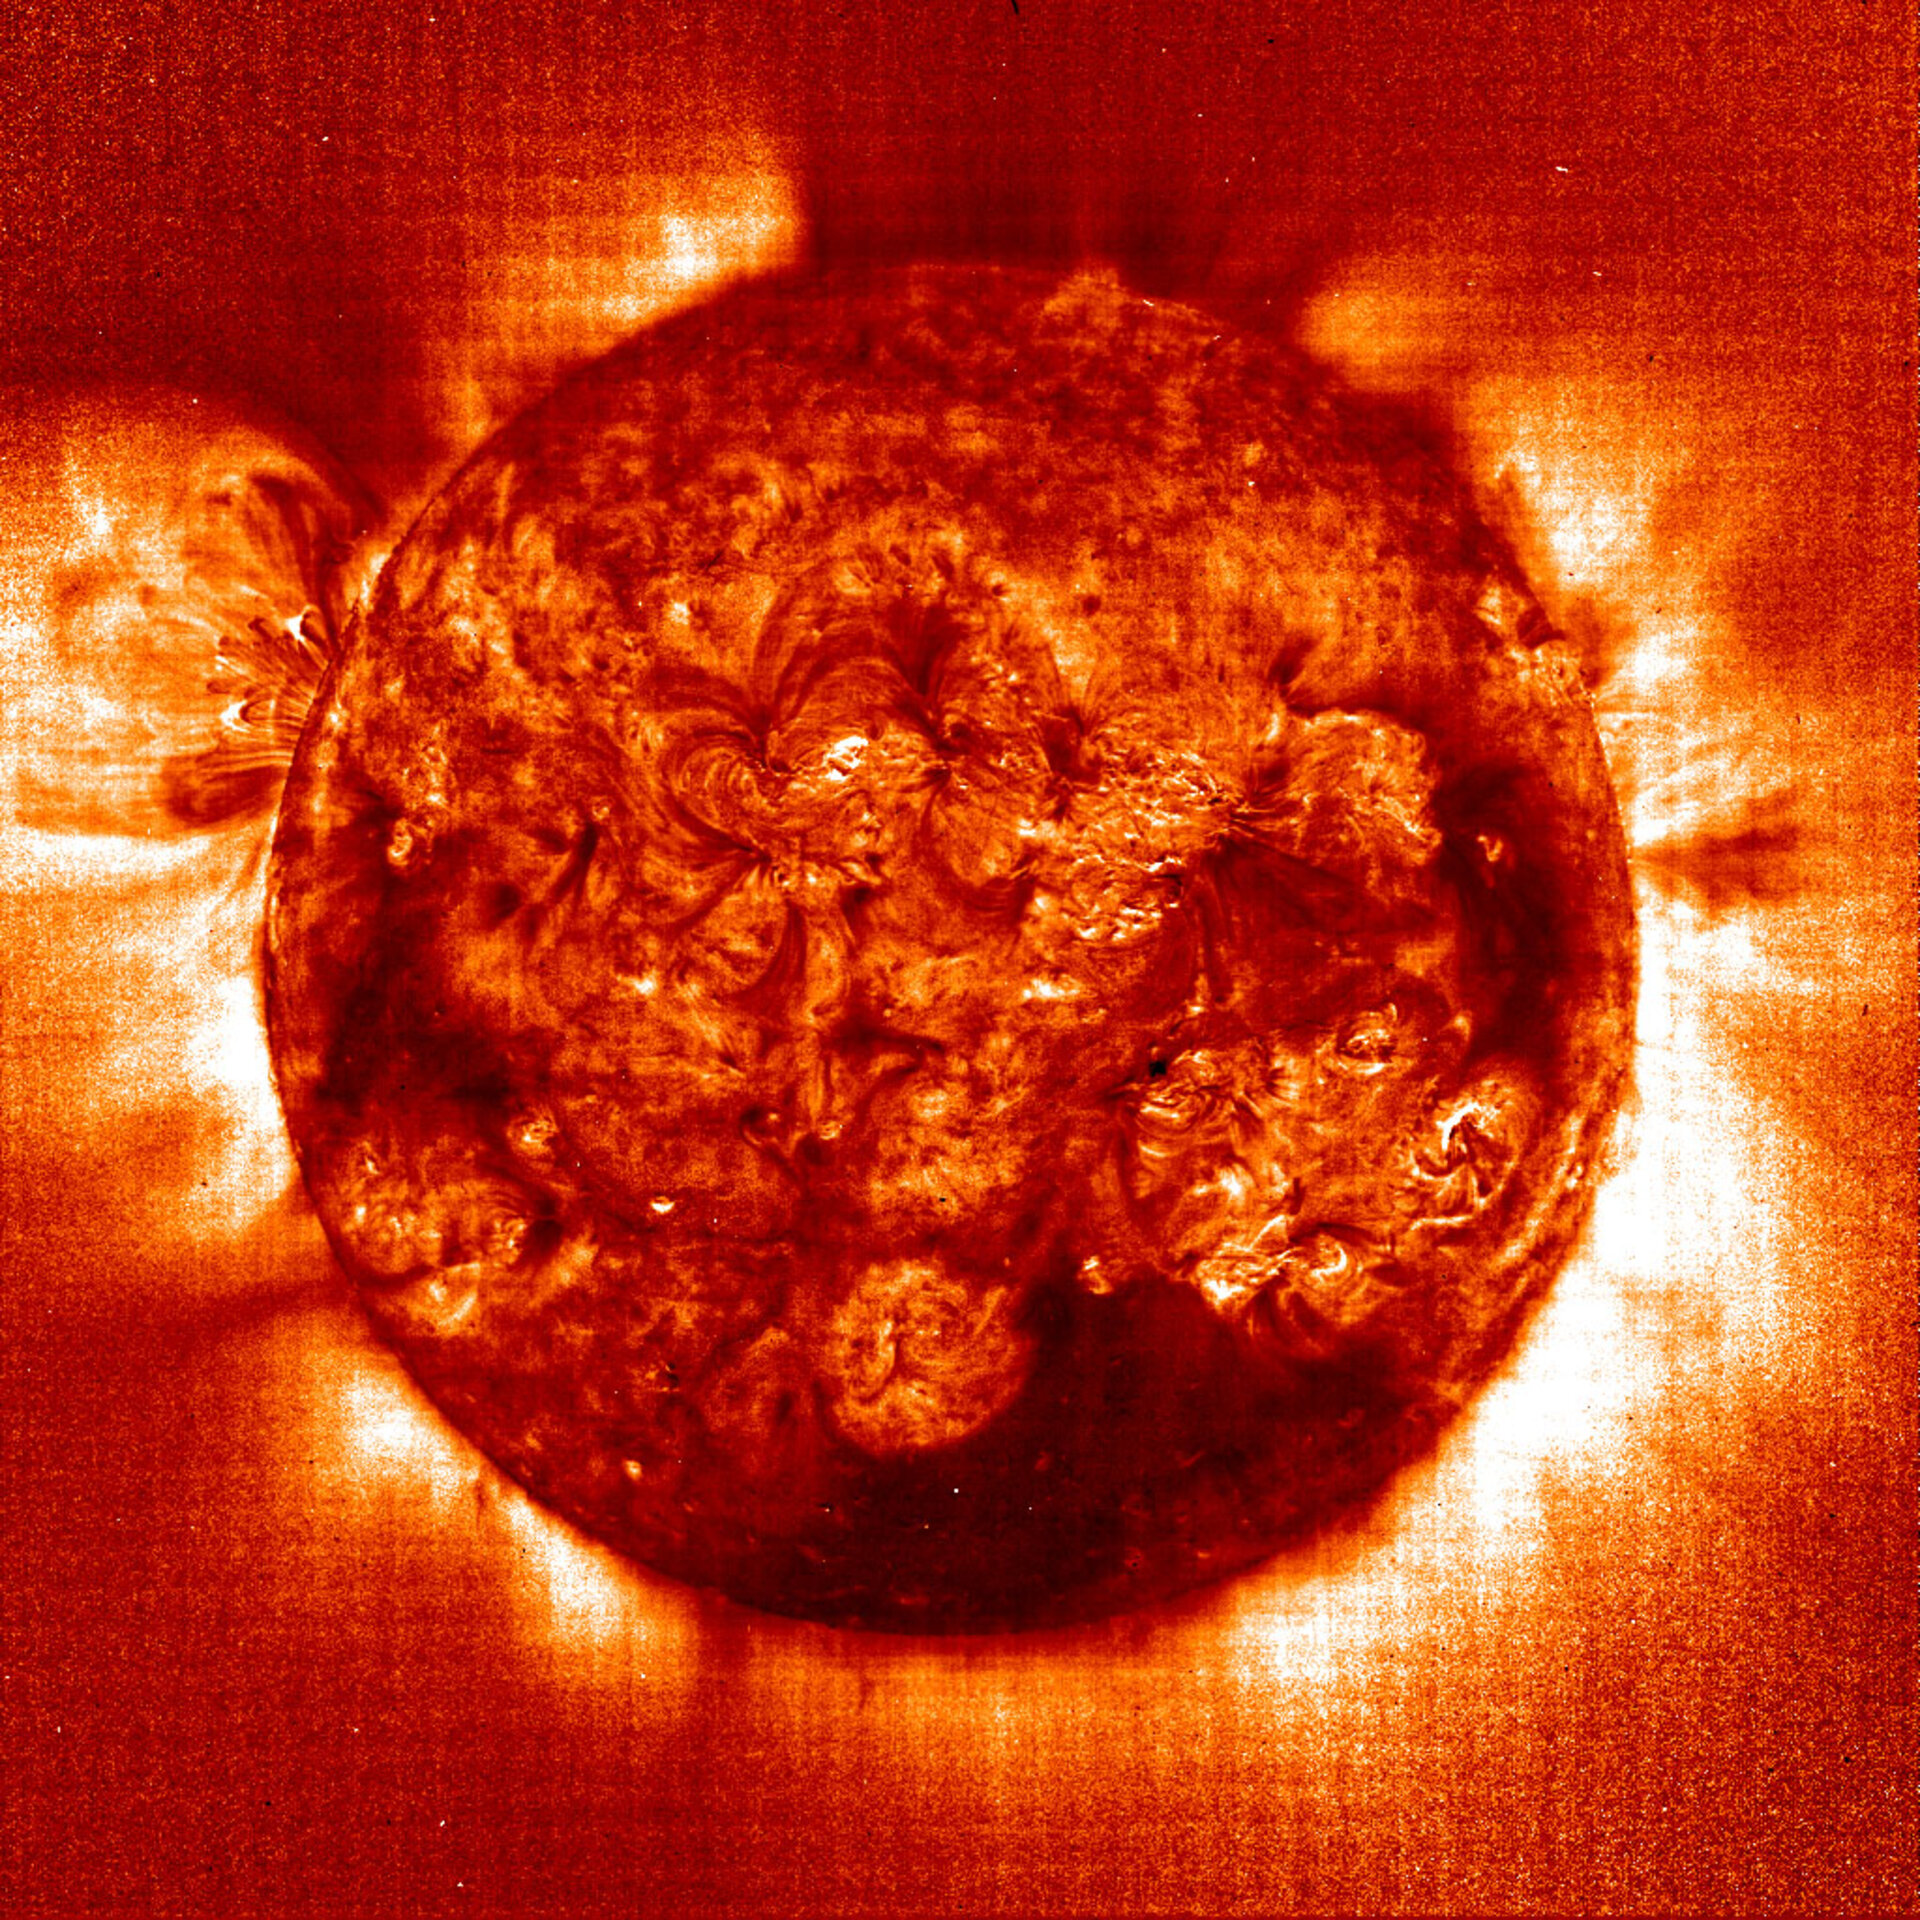 A temperature map of the Sun's corona as recorded by the EIT instrument on SOHO